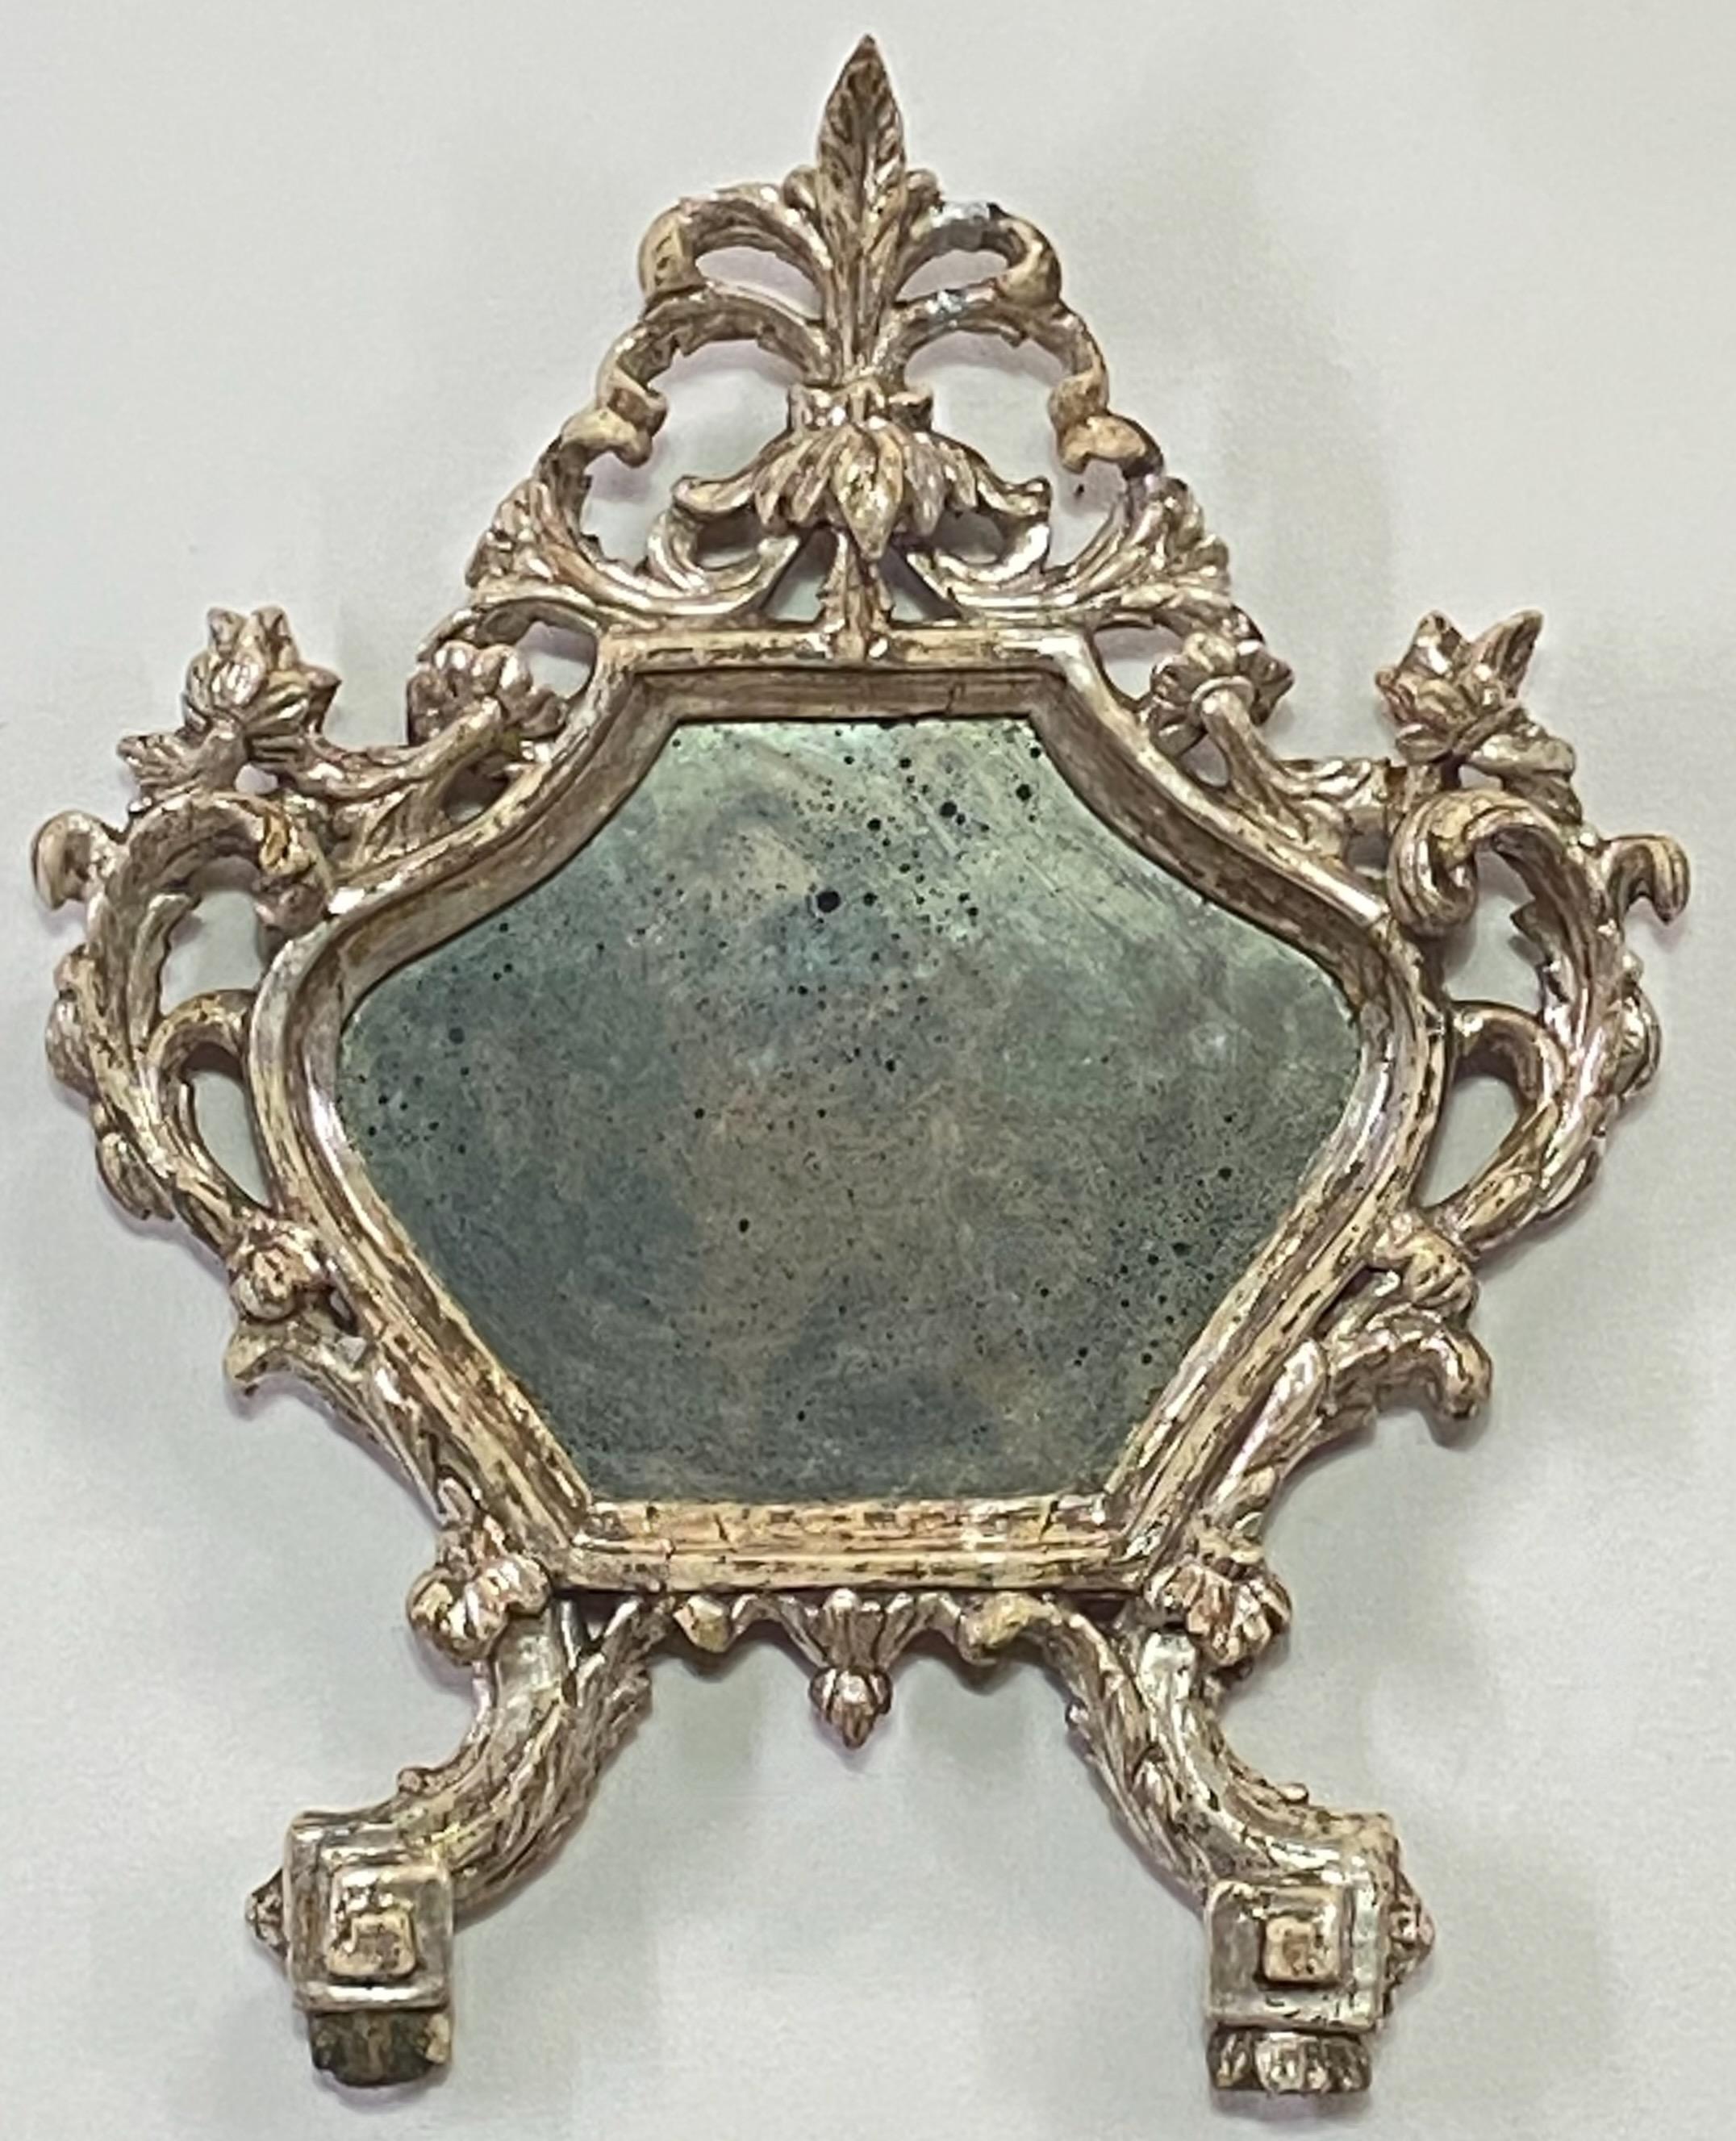 Late 17th or early 18th century Italian Memento Mori silver gilt frame. This would have originally held a prayer or poem on paper or canvas. Now replaced with a antiqued distressed mirror in ex cond. Has some relatively minor loss of silver gilding.